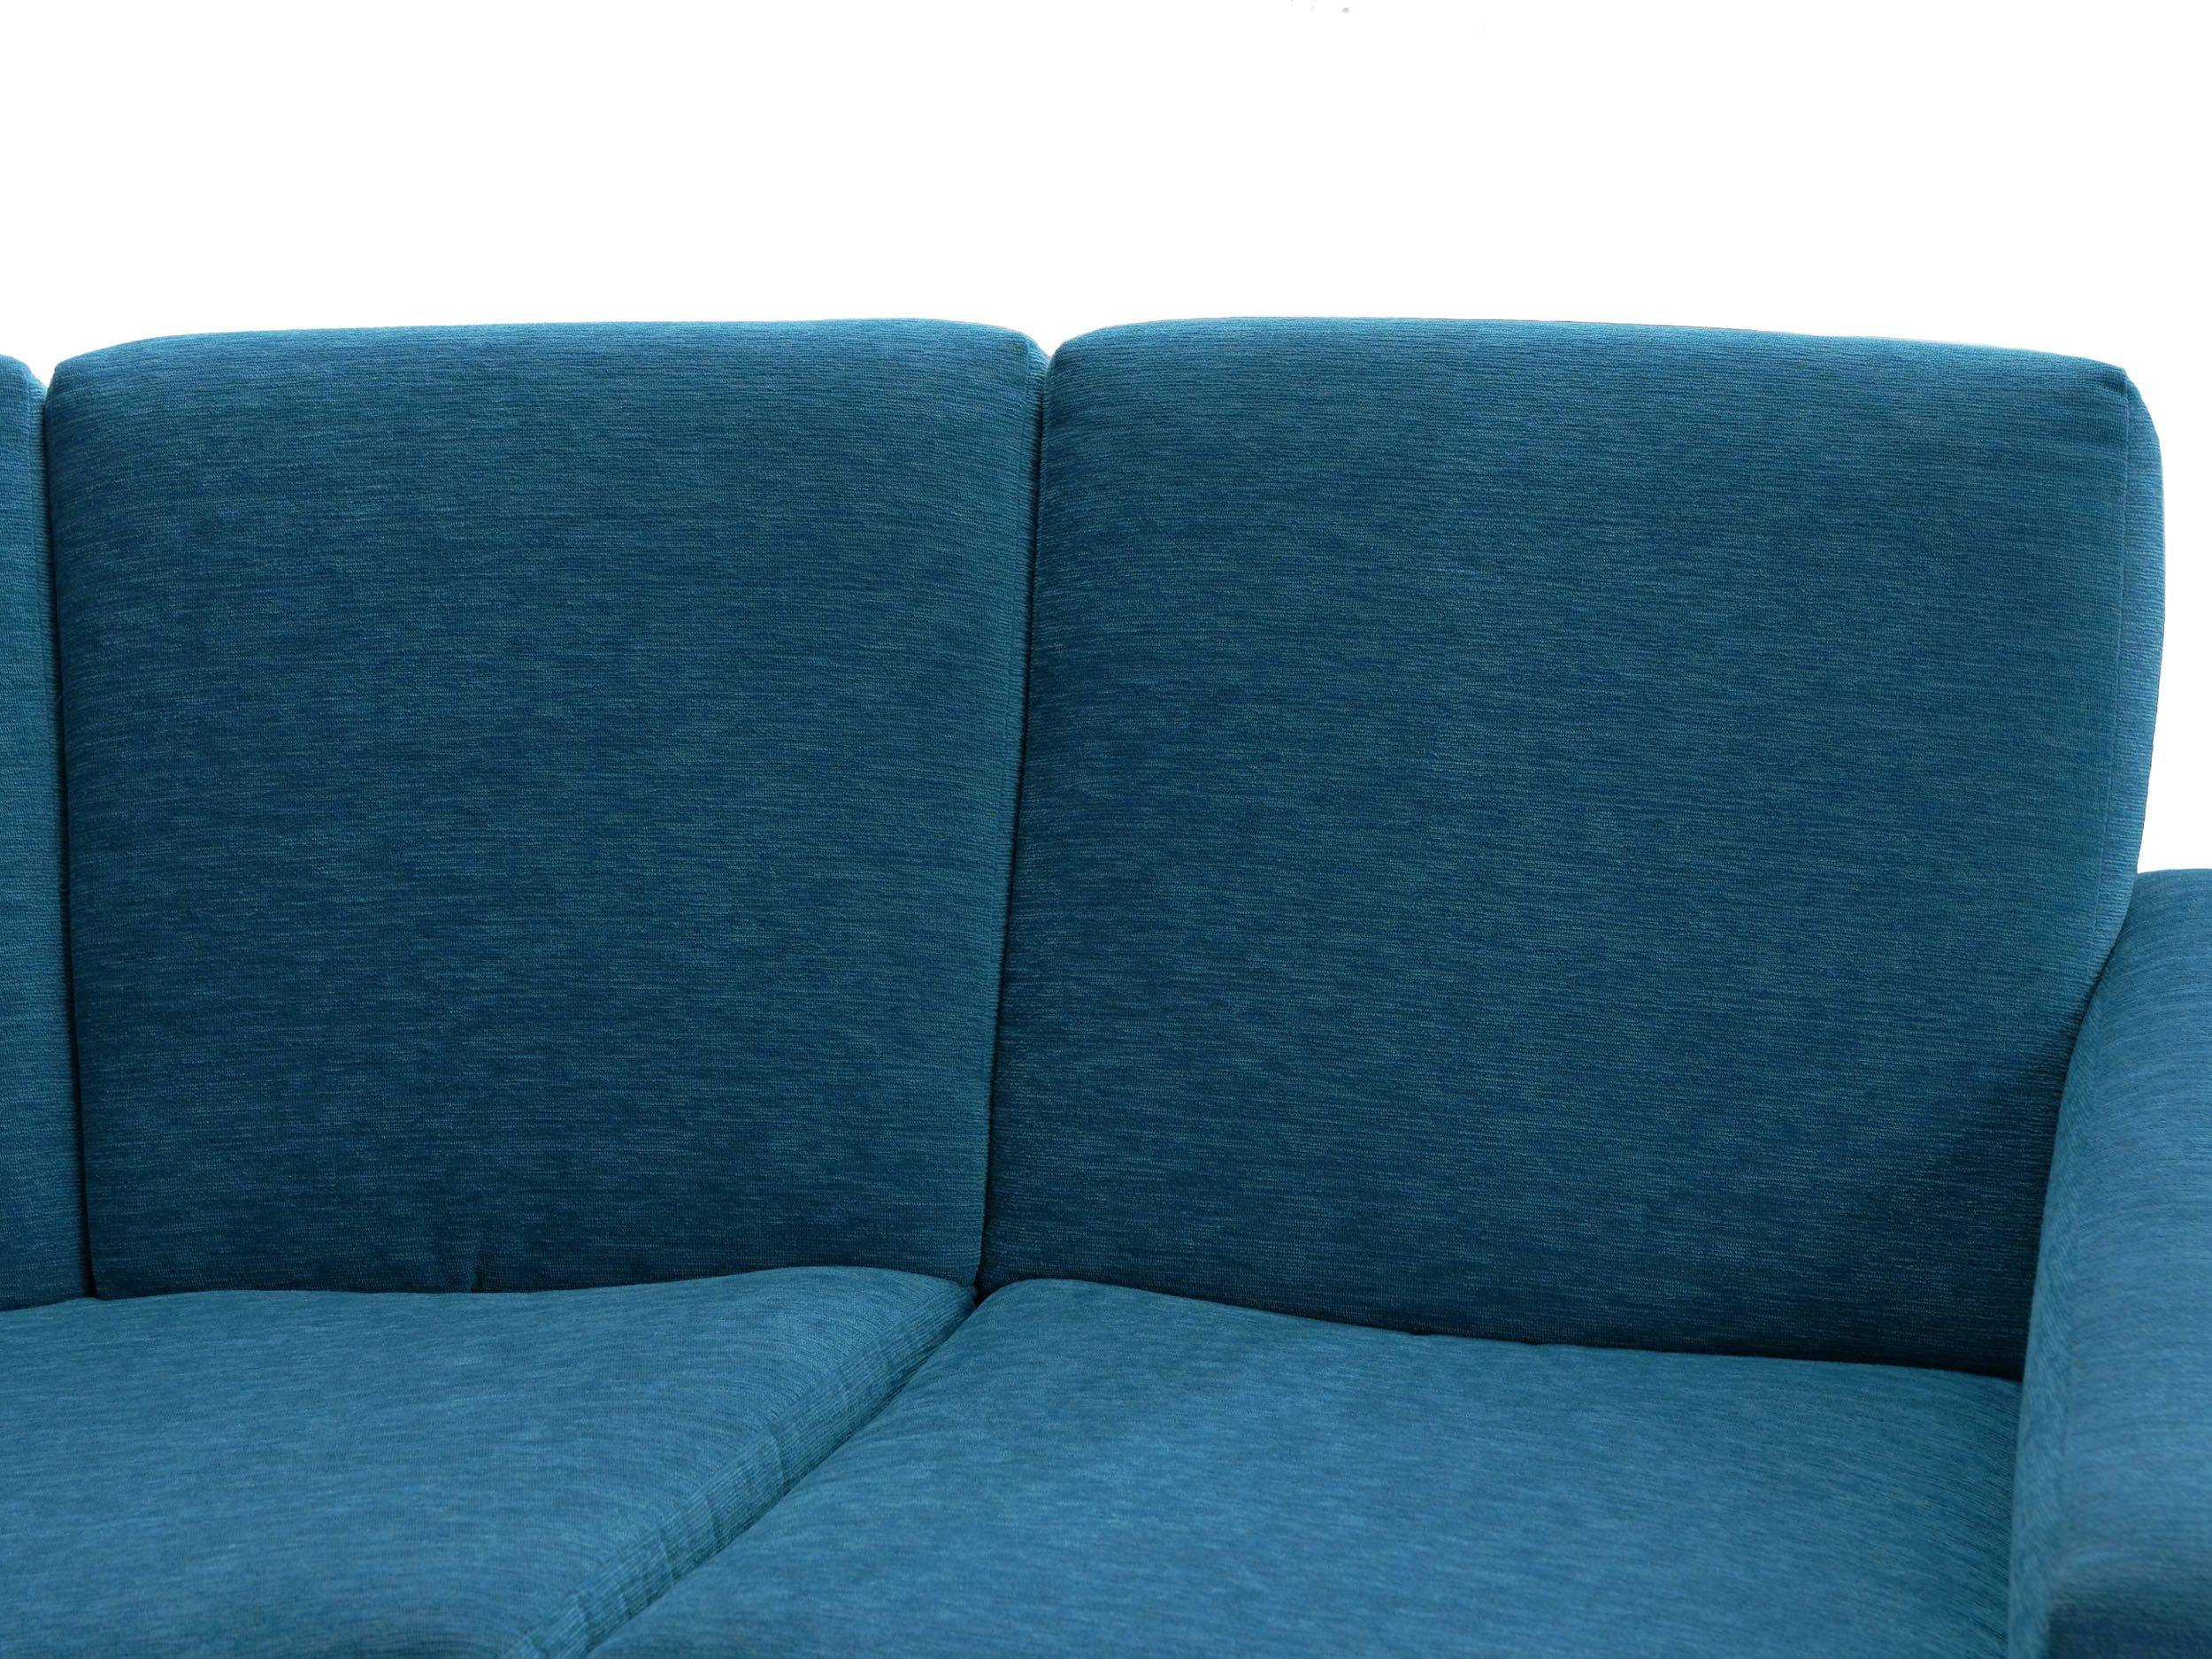 20th Century Rare Vintage Two-Part Blue Upholstered Model L-10 Curved Sofa by Pierre Guariche